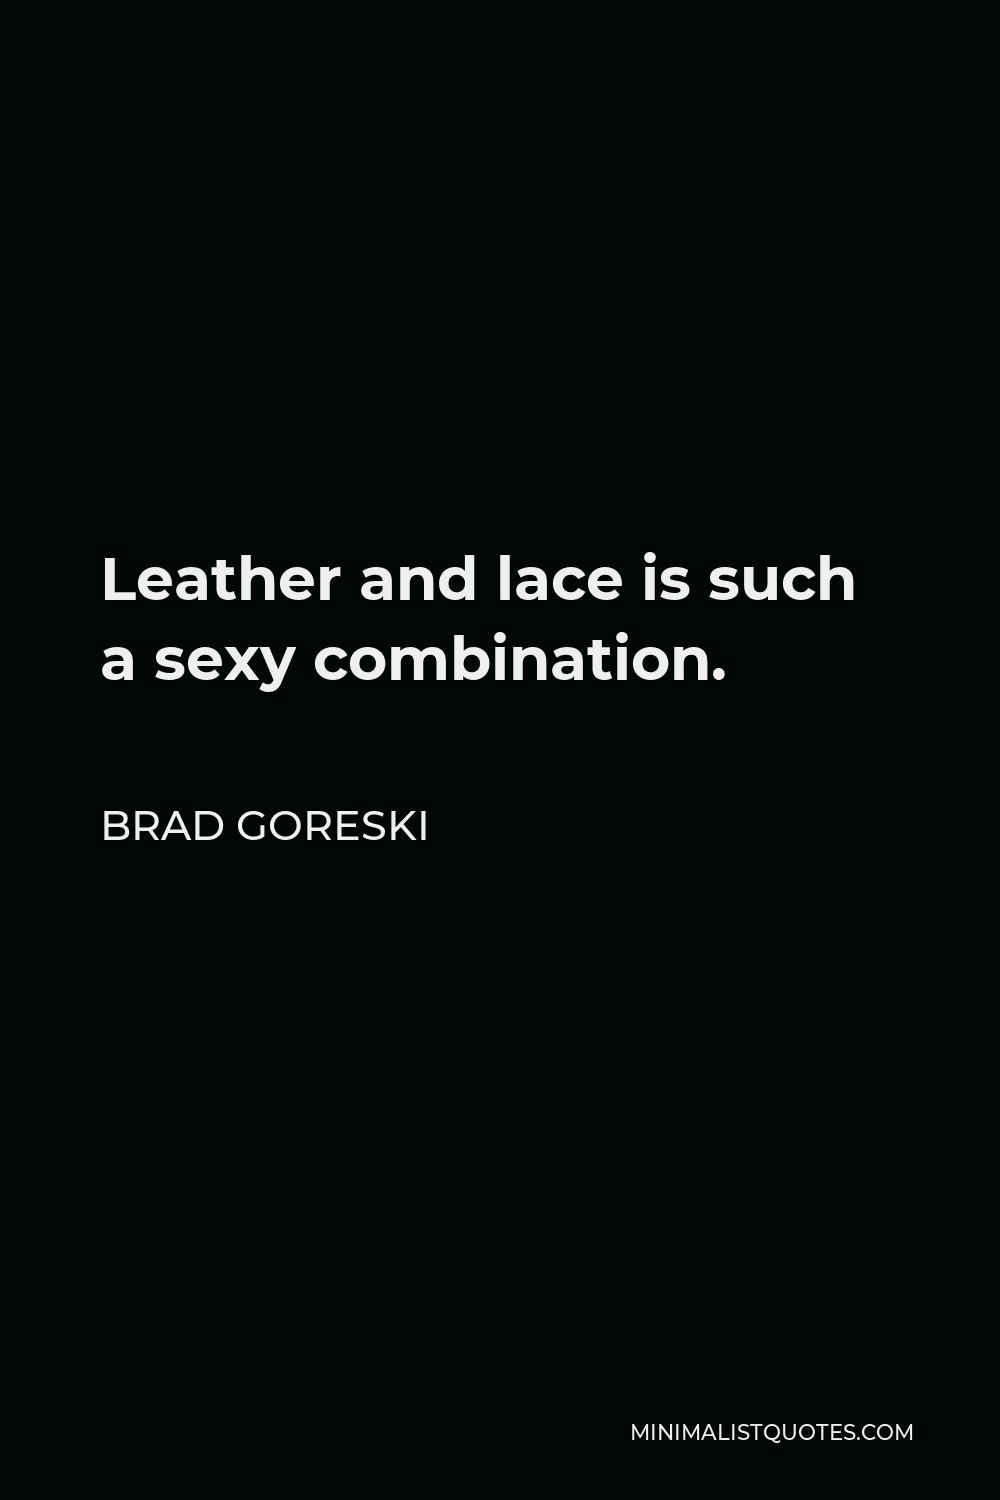 Brad Goreski Quote - Leather and lace is such a sexy combination.